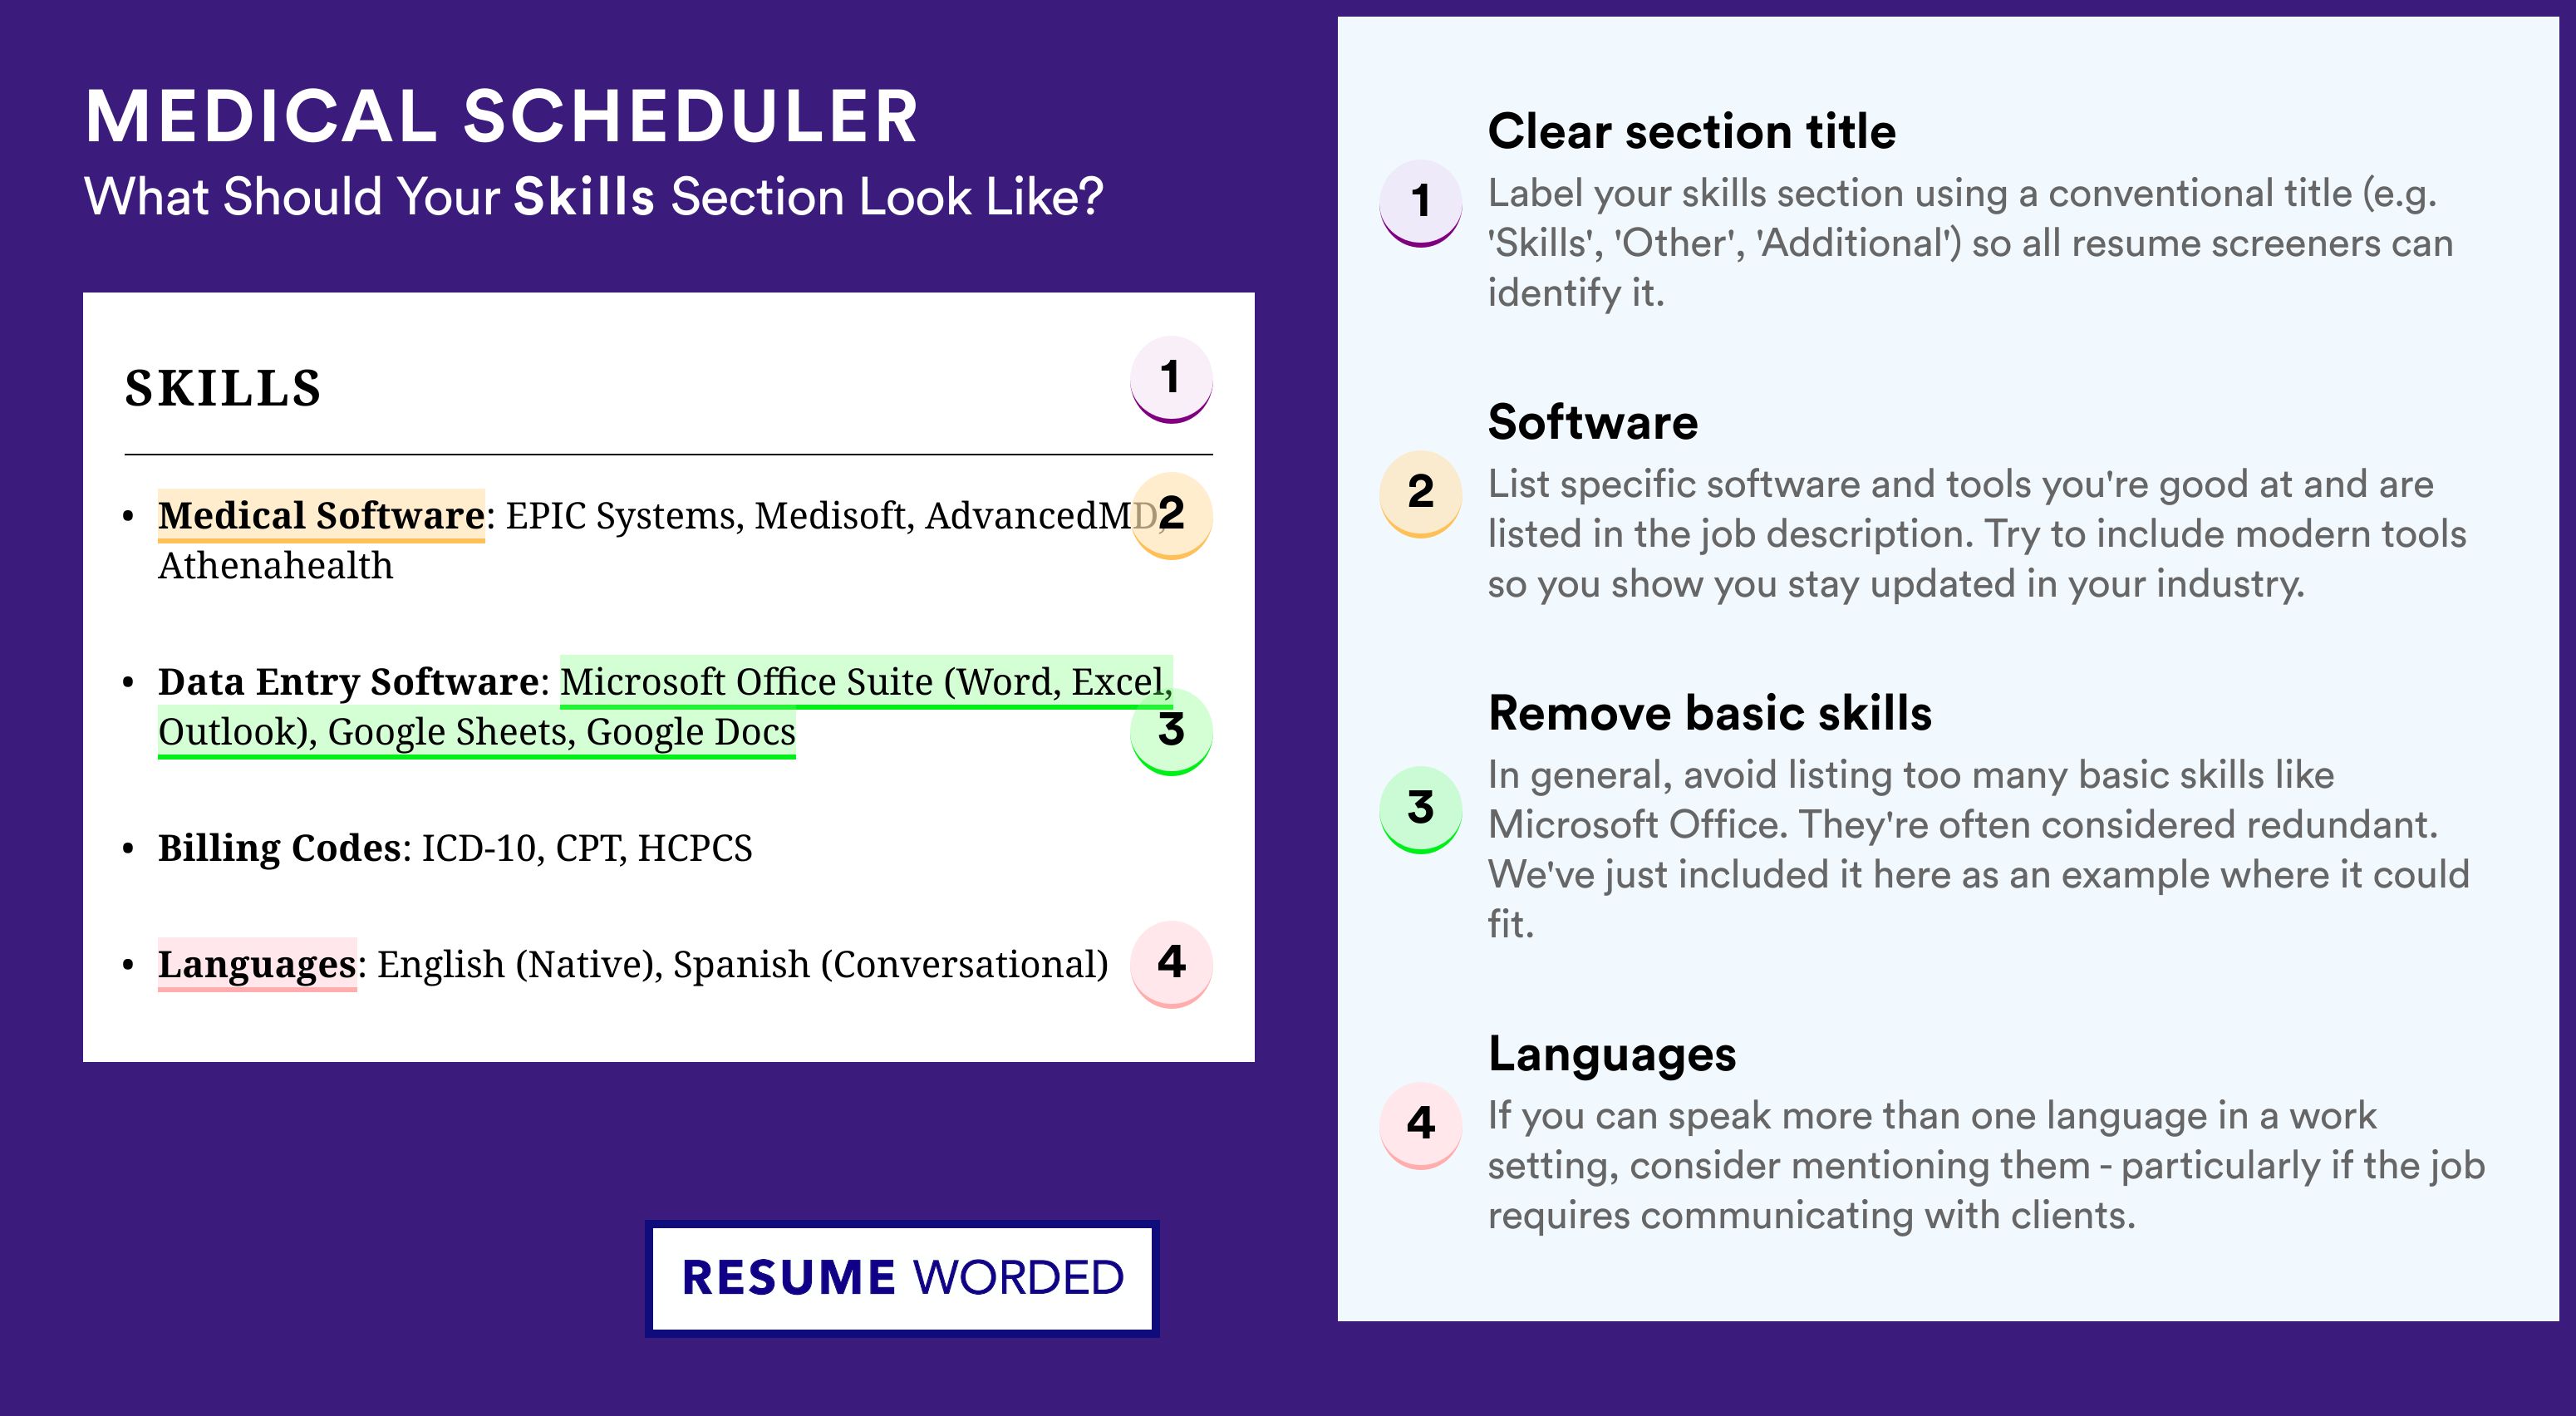 How To Write Your Skills Section - Medical Scheduler Roles